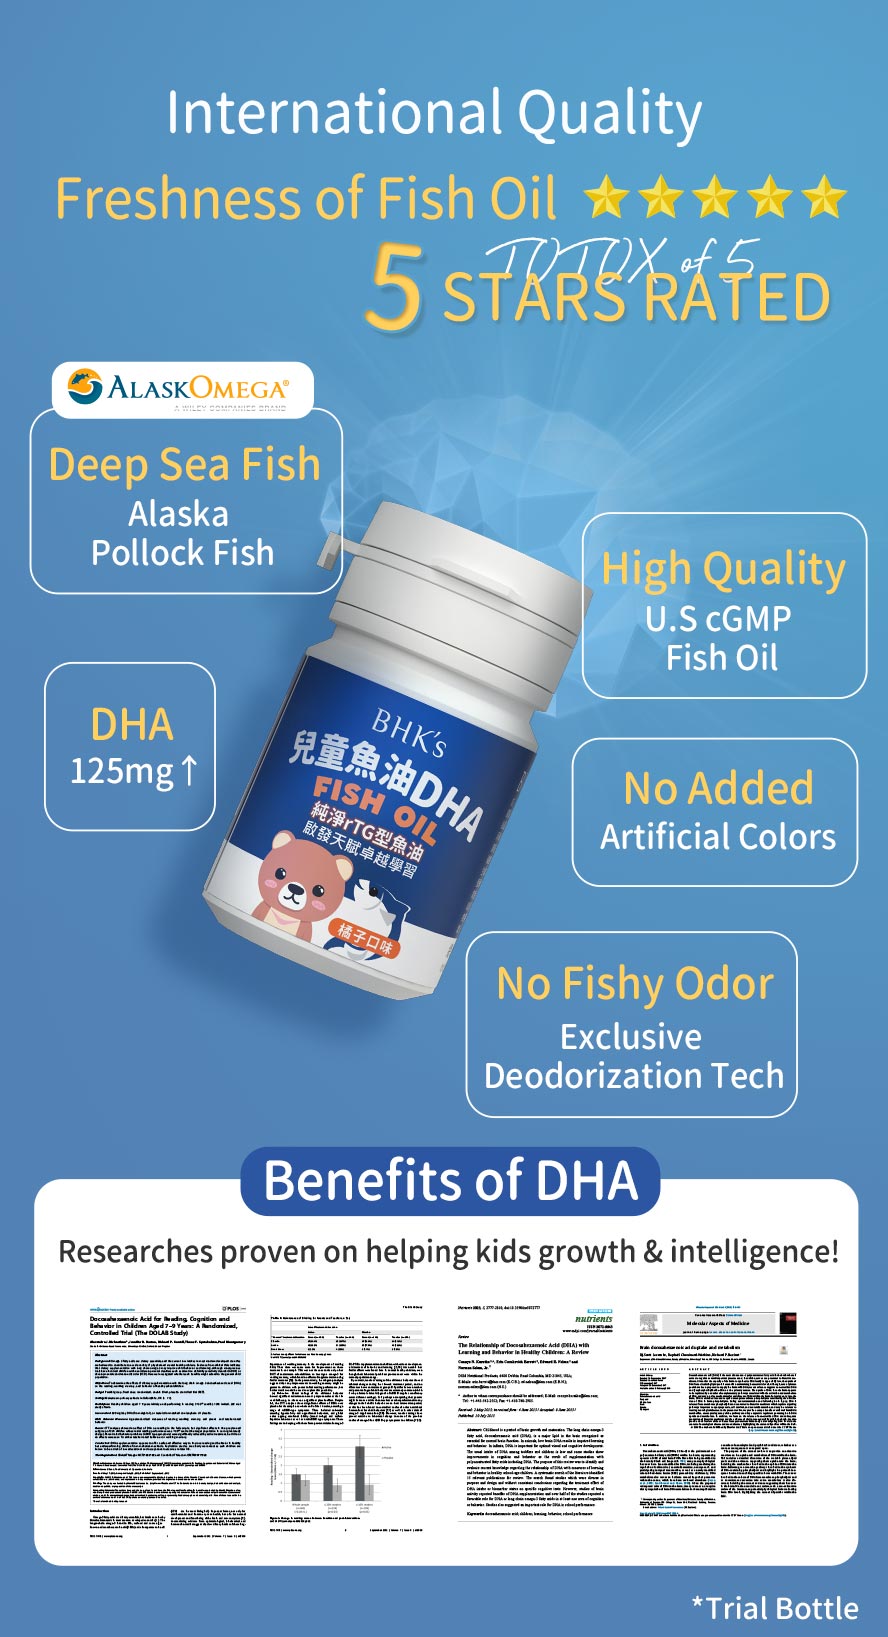 Carefully selected DHA with rTG type, easy to absorb, fulfil TOTOX standardization, with no fishy taste, no colorant, and easy to chew softgel to supplement kids needs without any hustle